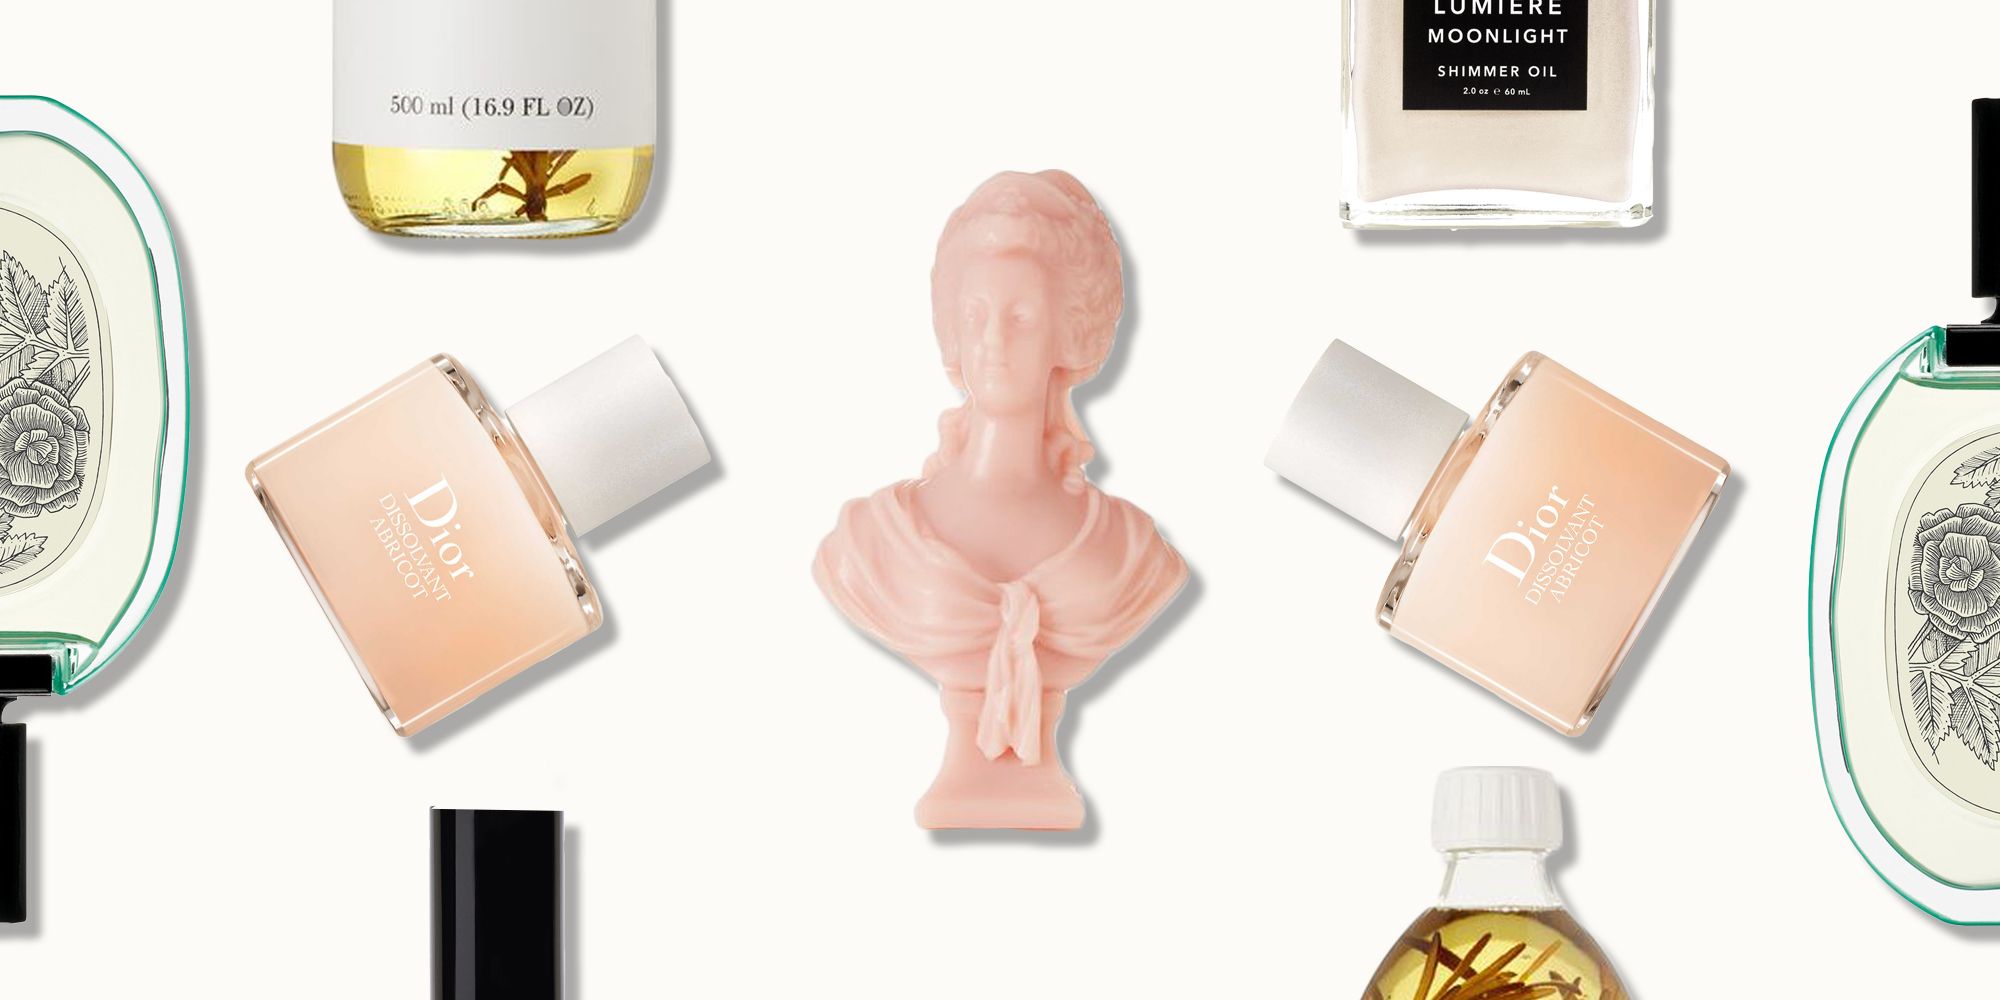 20 Hair, Makeup And Skincare Products With Cute Packaging